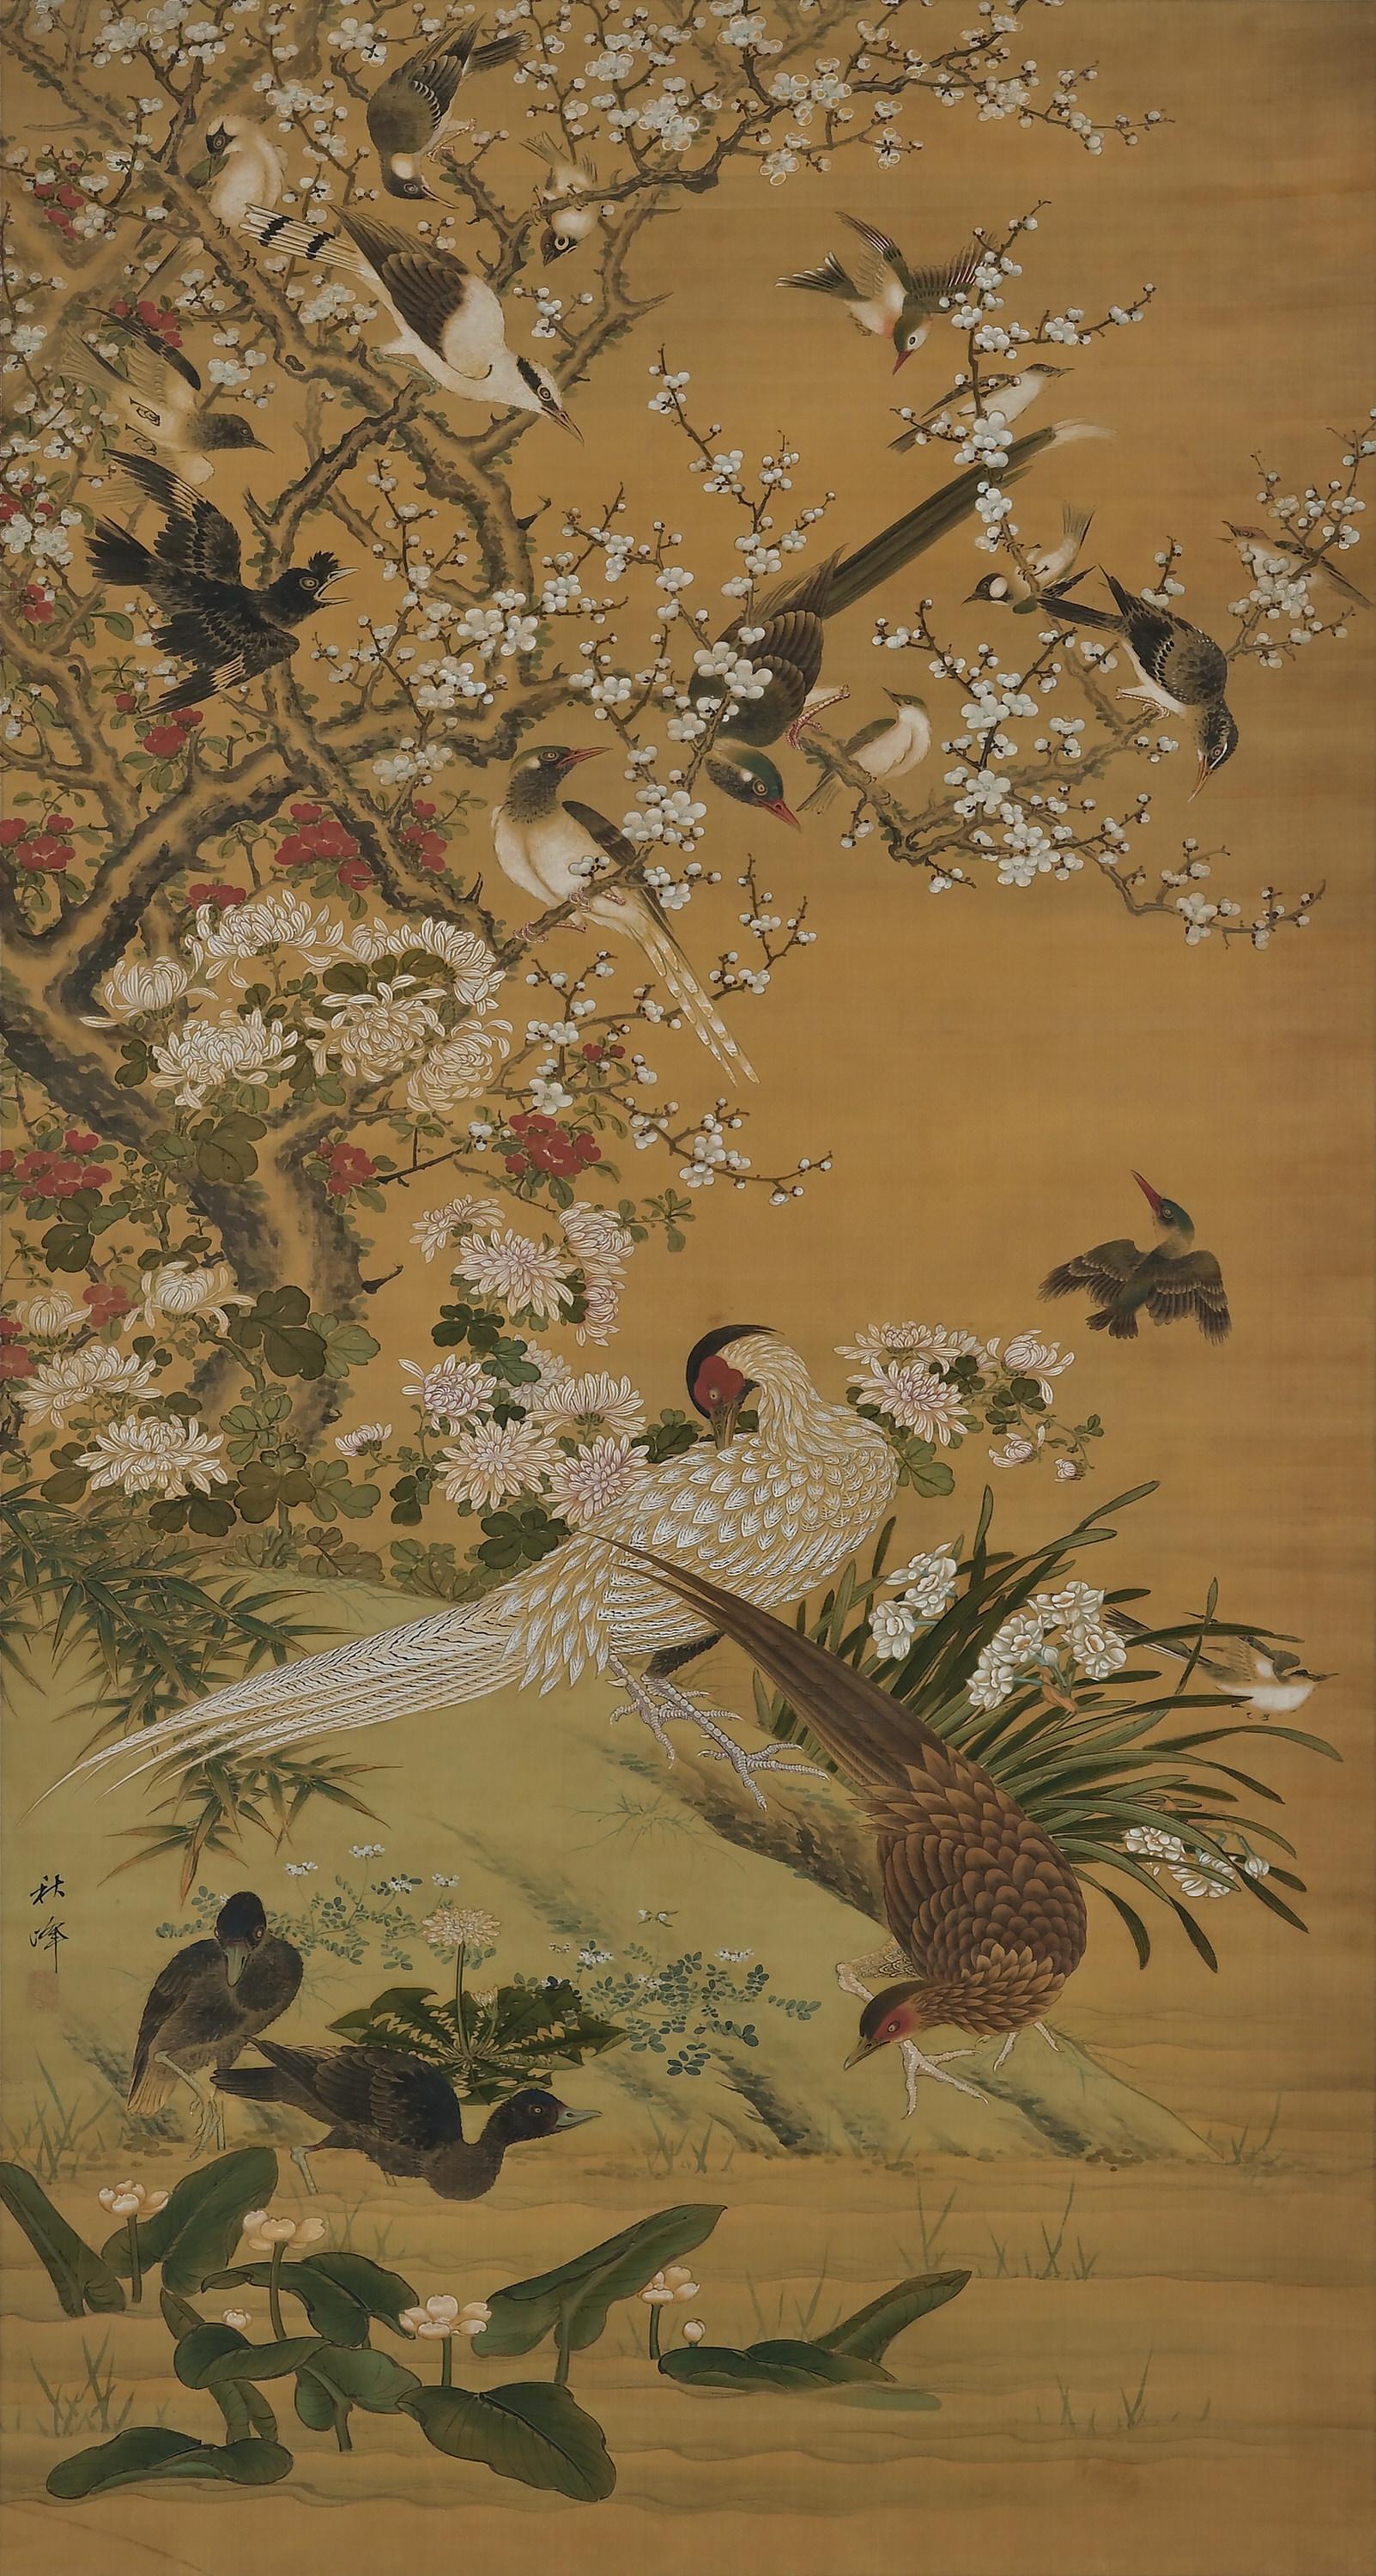 Birds and flowers of the four seasons

Early to mid-19th century

Ink, pigment and gofun on silk

Unidentified artist

Signature: Shuho

Seal: Shuho ga in

A large Japanese bird and flower scroll painting from the late Edo period. It is